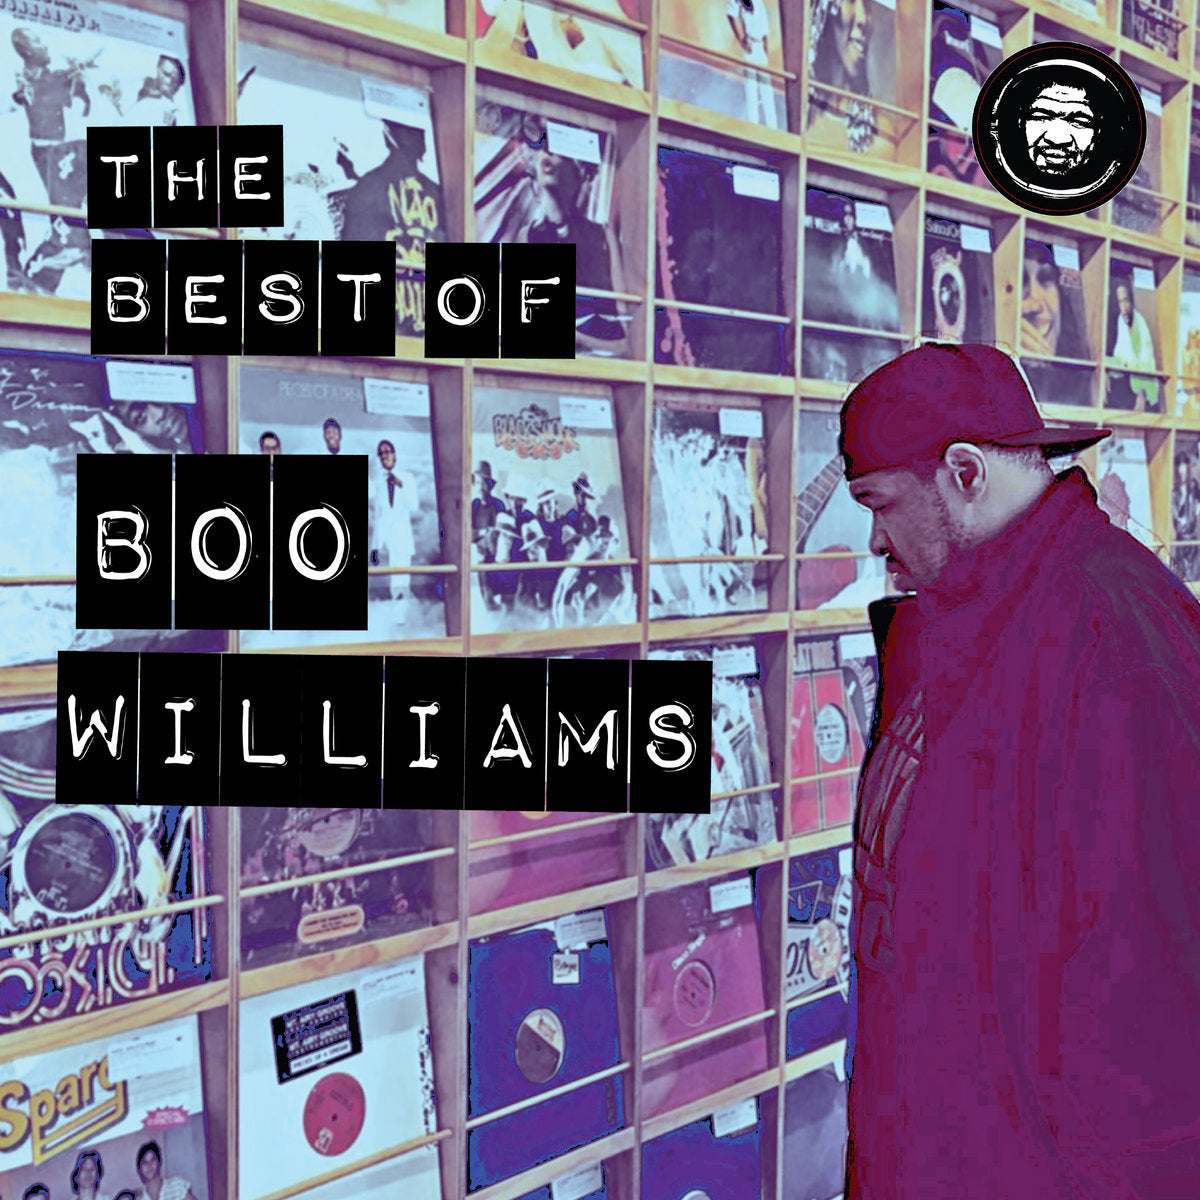 The Best Of Boo Williams (New 2LP)